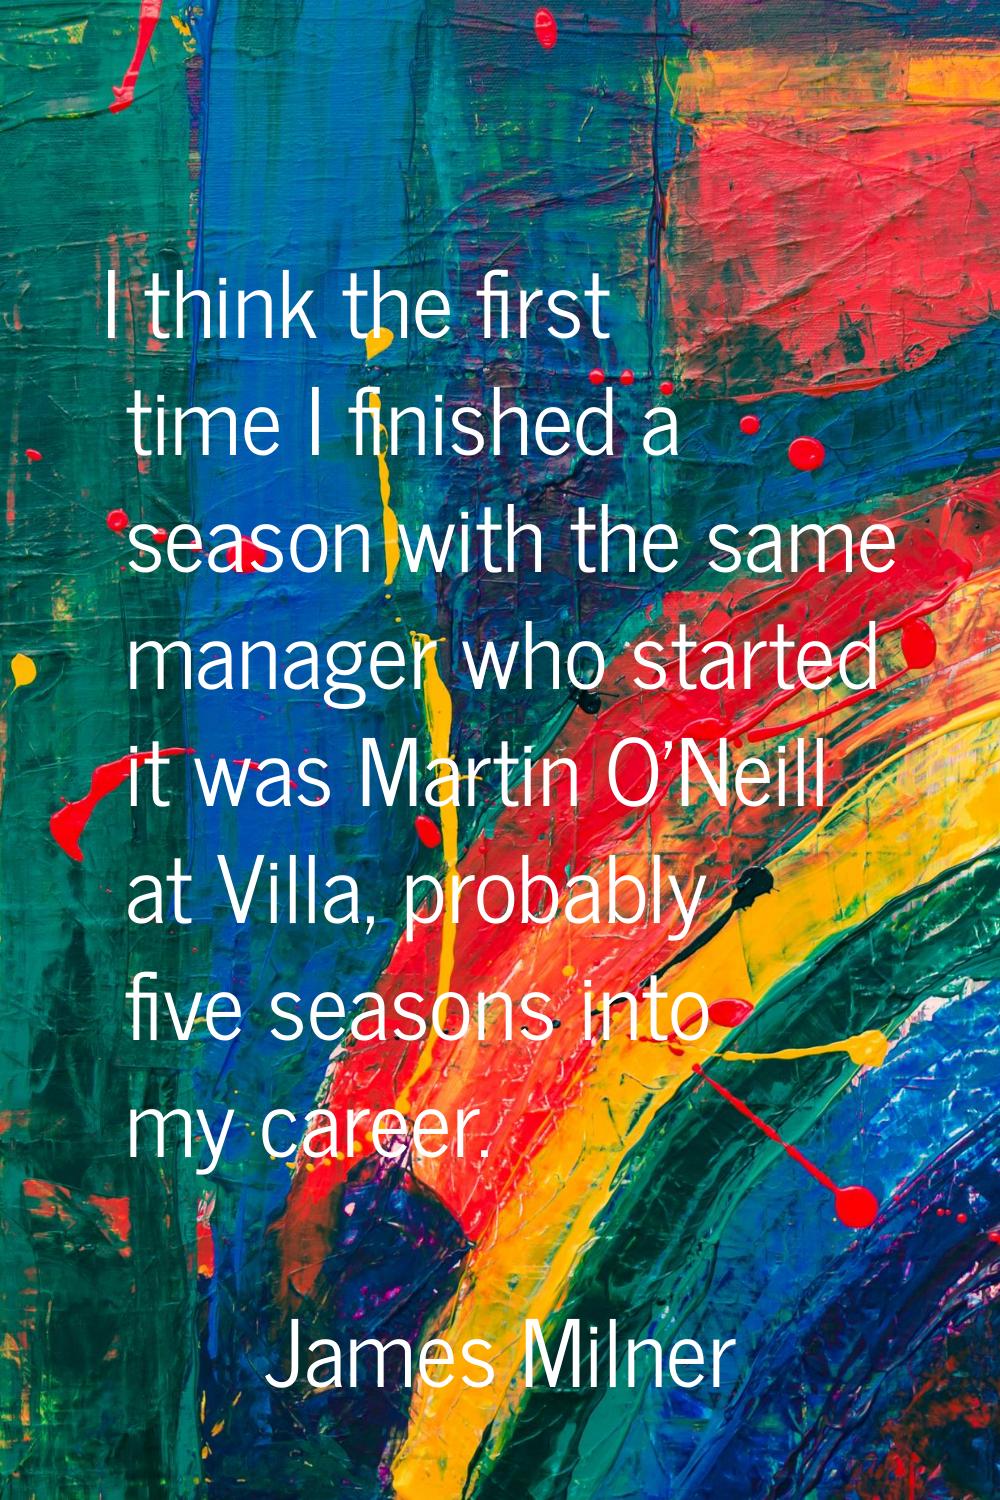 I think the first time I finished a season with the same manager who started it was Martin O'Neill 